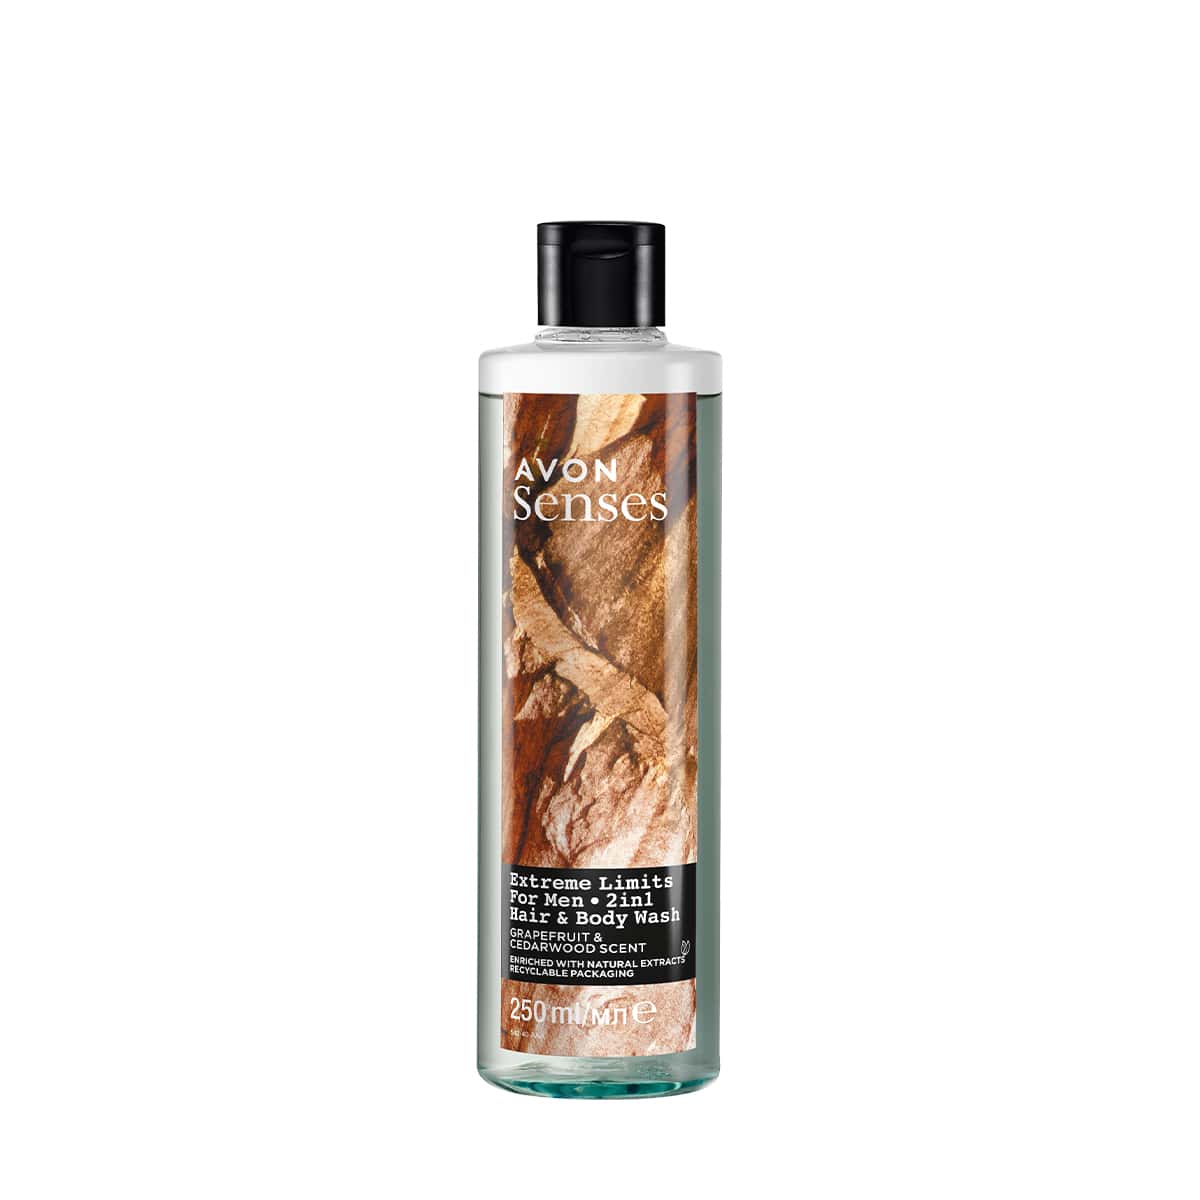 Senses Extreme Limits 2 in 1 Hair & Body Wash 250ml